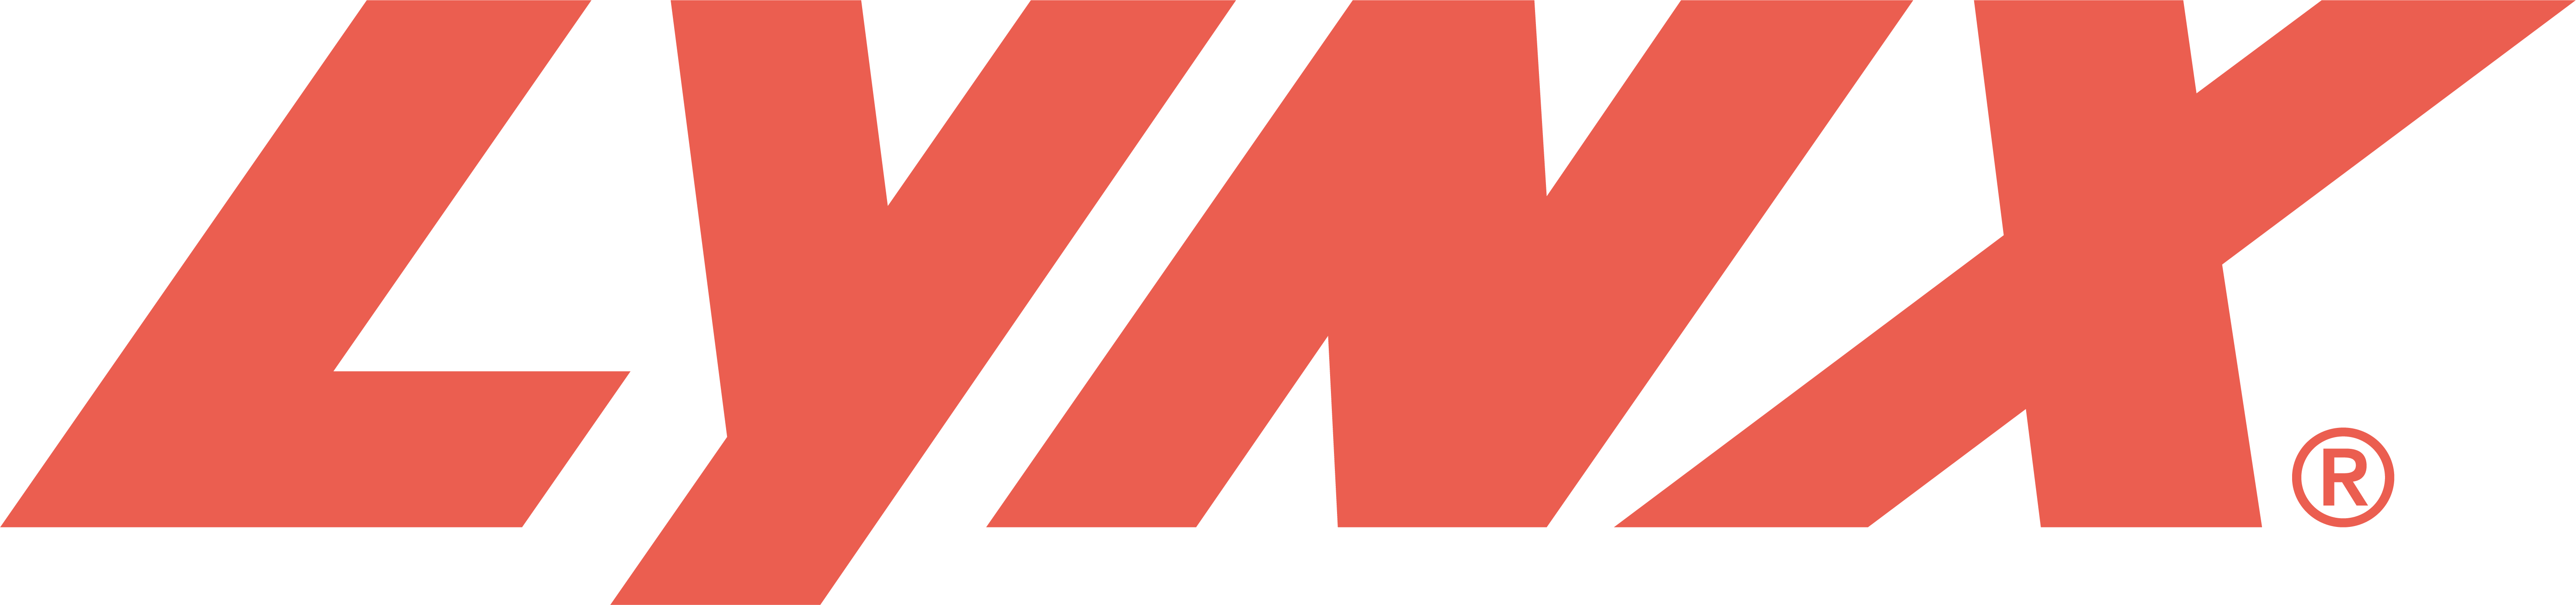 lynx_logo_warm_red_020719043028.png